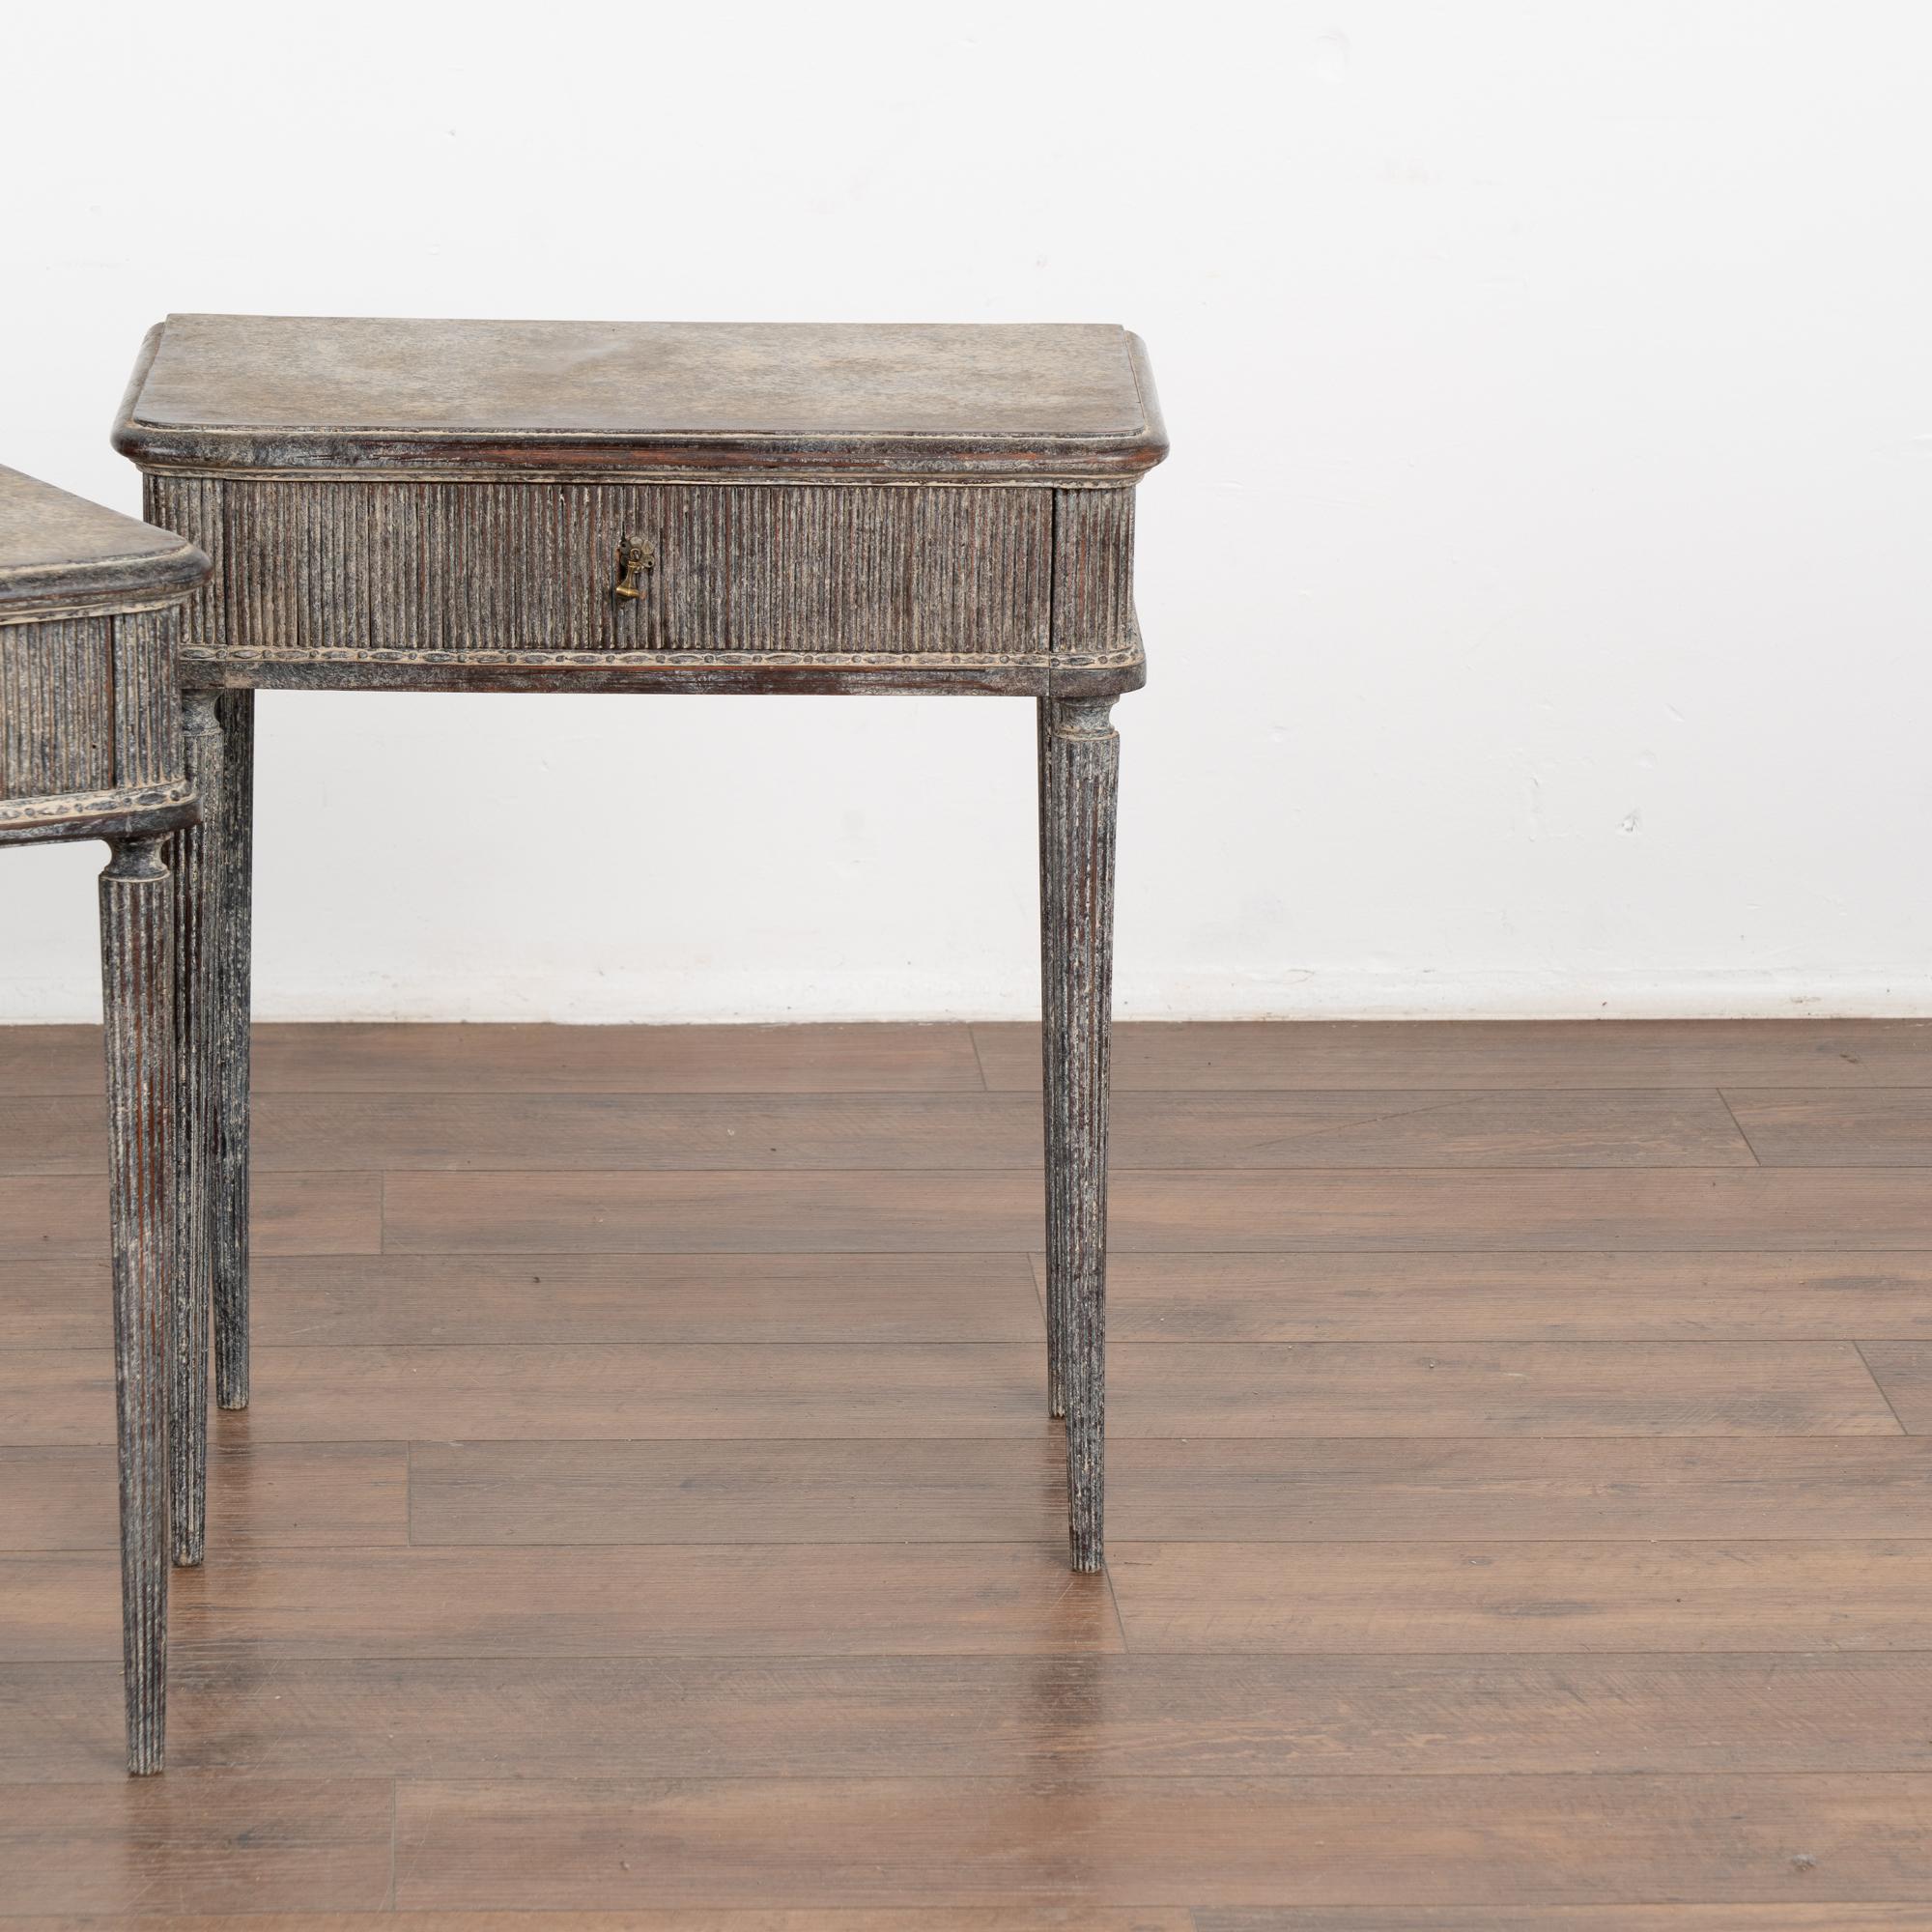 Wood Pair, Gray Painted Side Tables, Sweden circa 1940-60